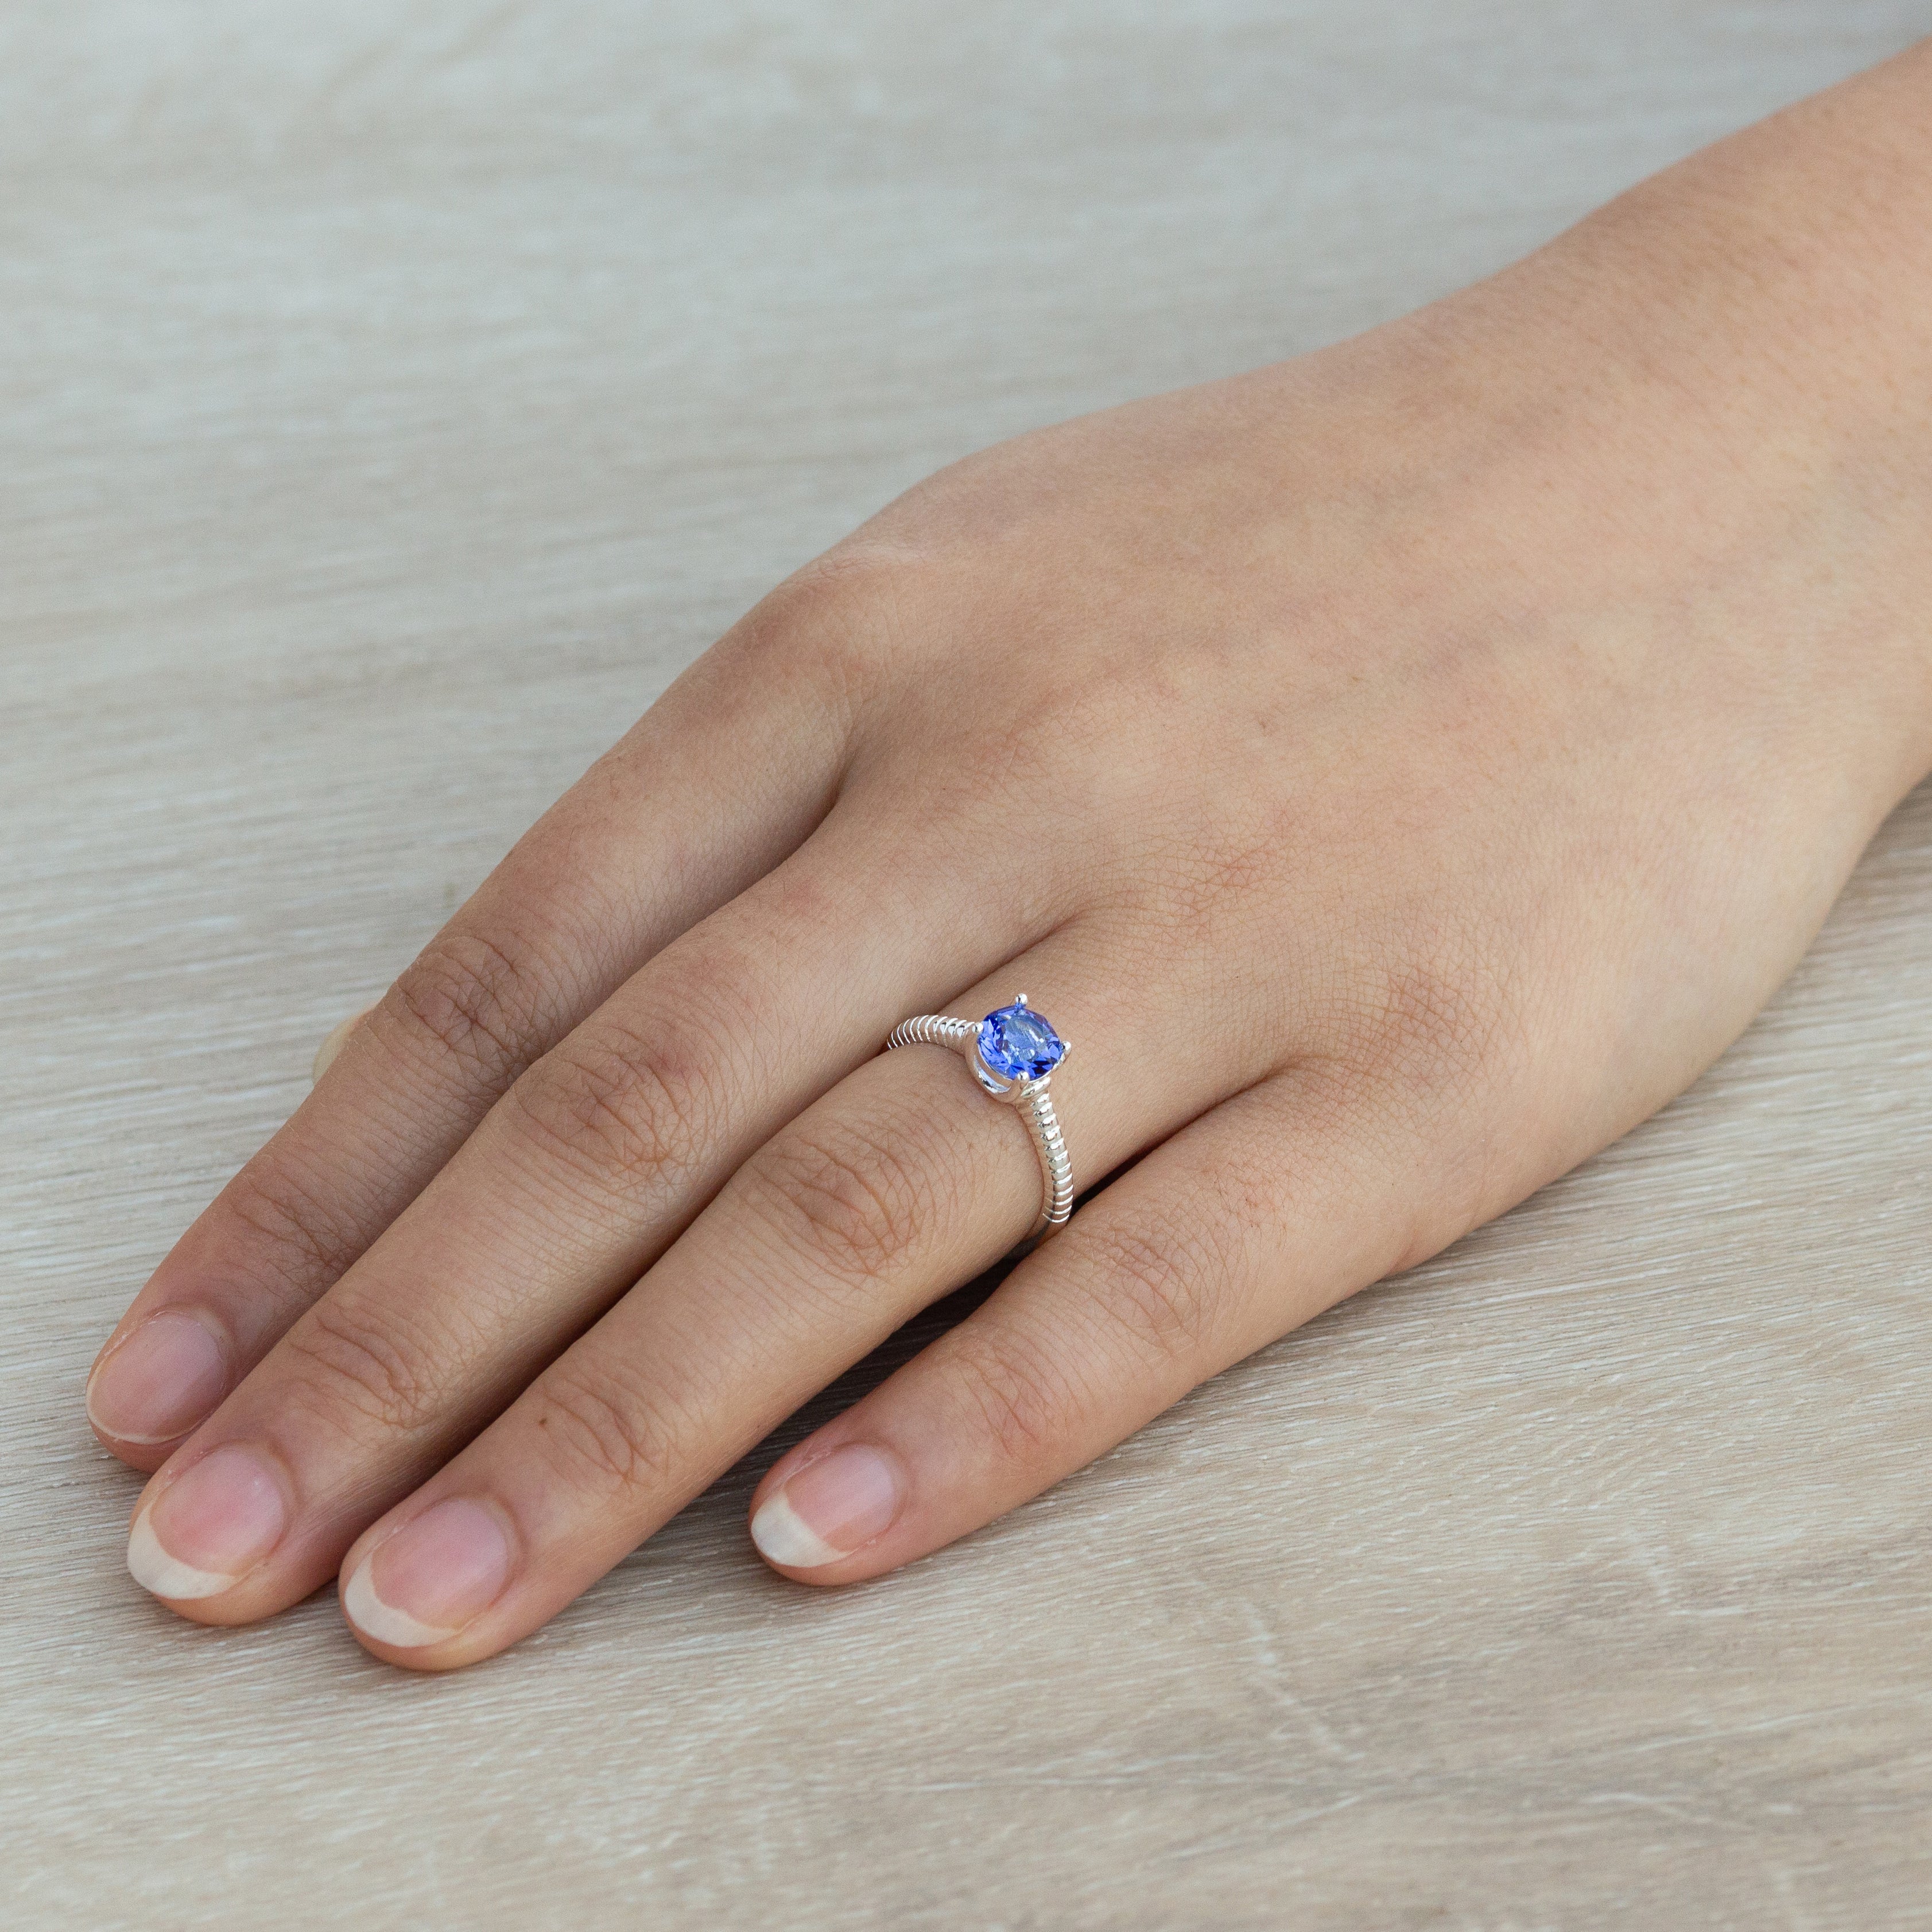 September (Sapphire) Adjustable Birthstone Ring Created with Zircondia® Crystals